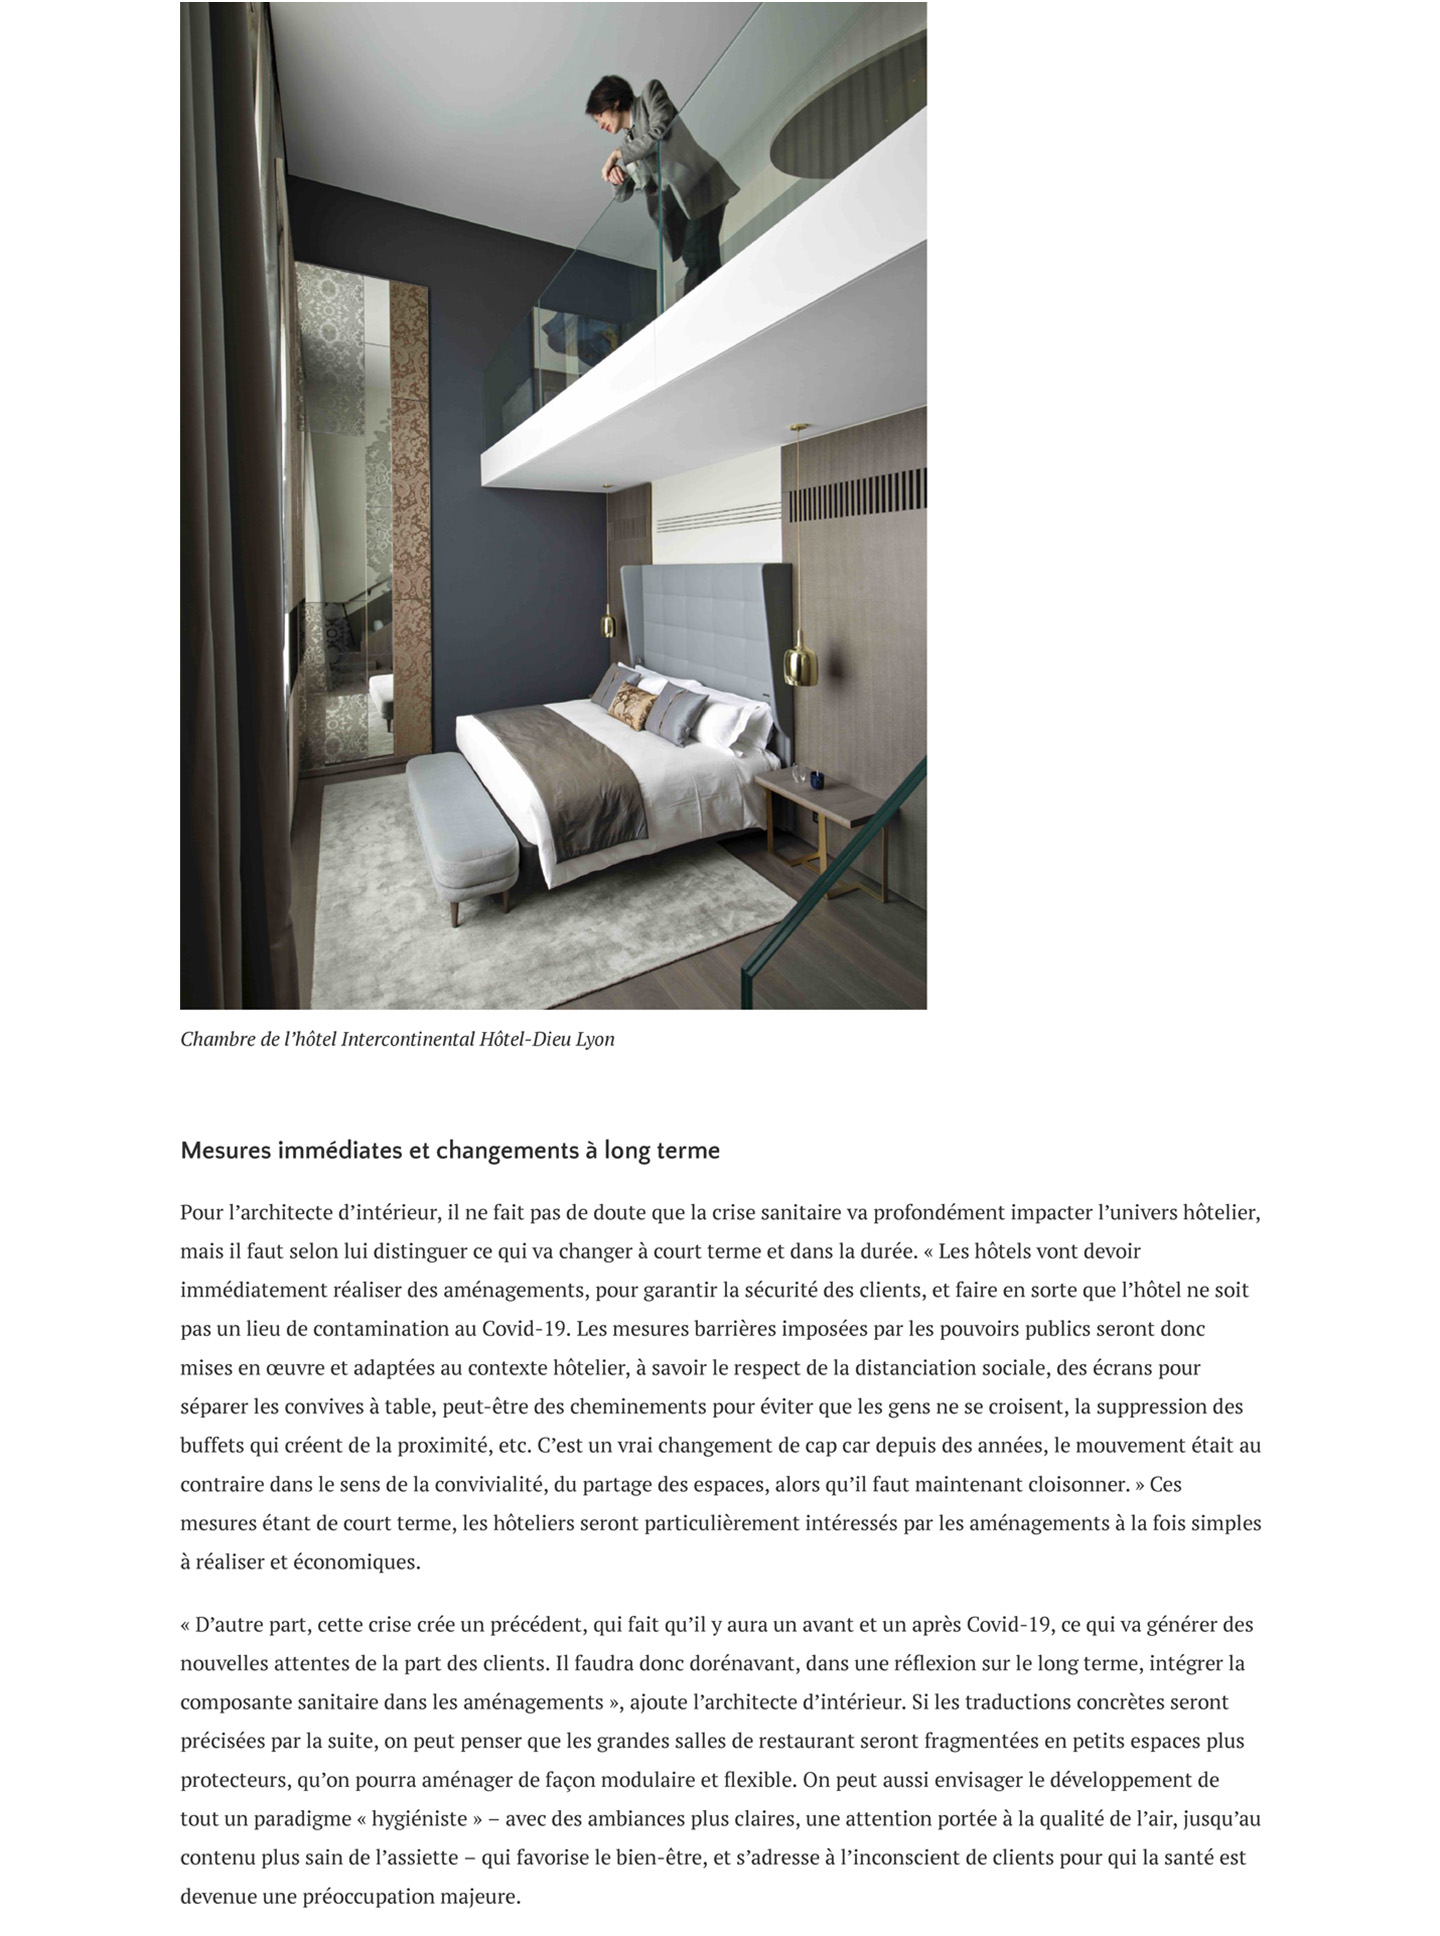 Article on the architect and decorator Jean-Philippe Nuel and his vision of the hotel world after covid in the magazine Archicree